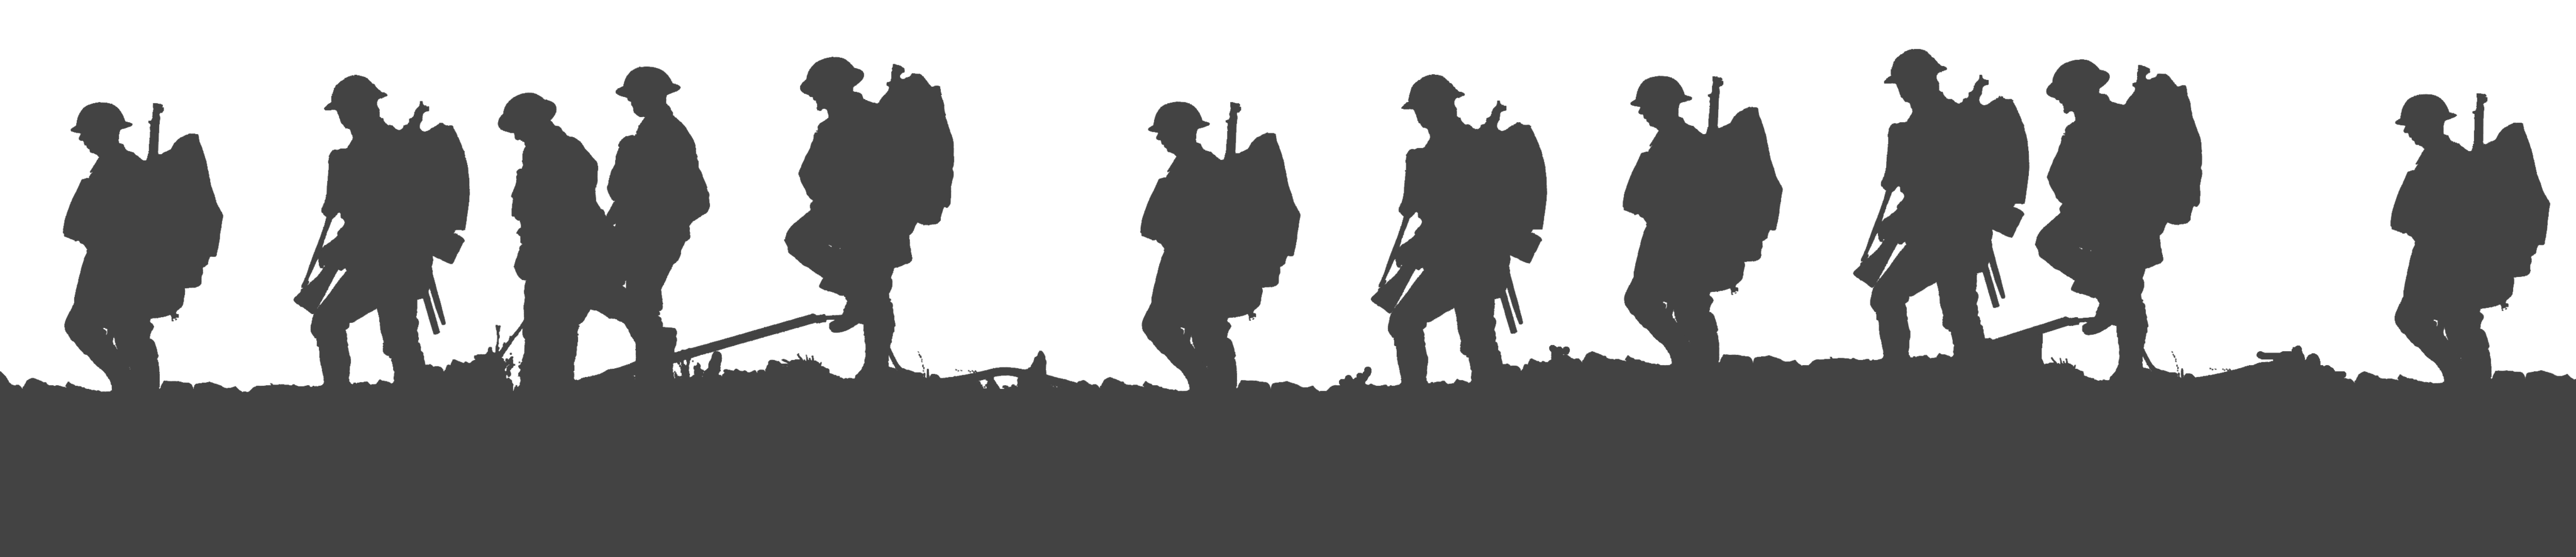 Lest we forget First World War Soldier Silhouette Military - soldiers ...